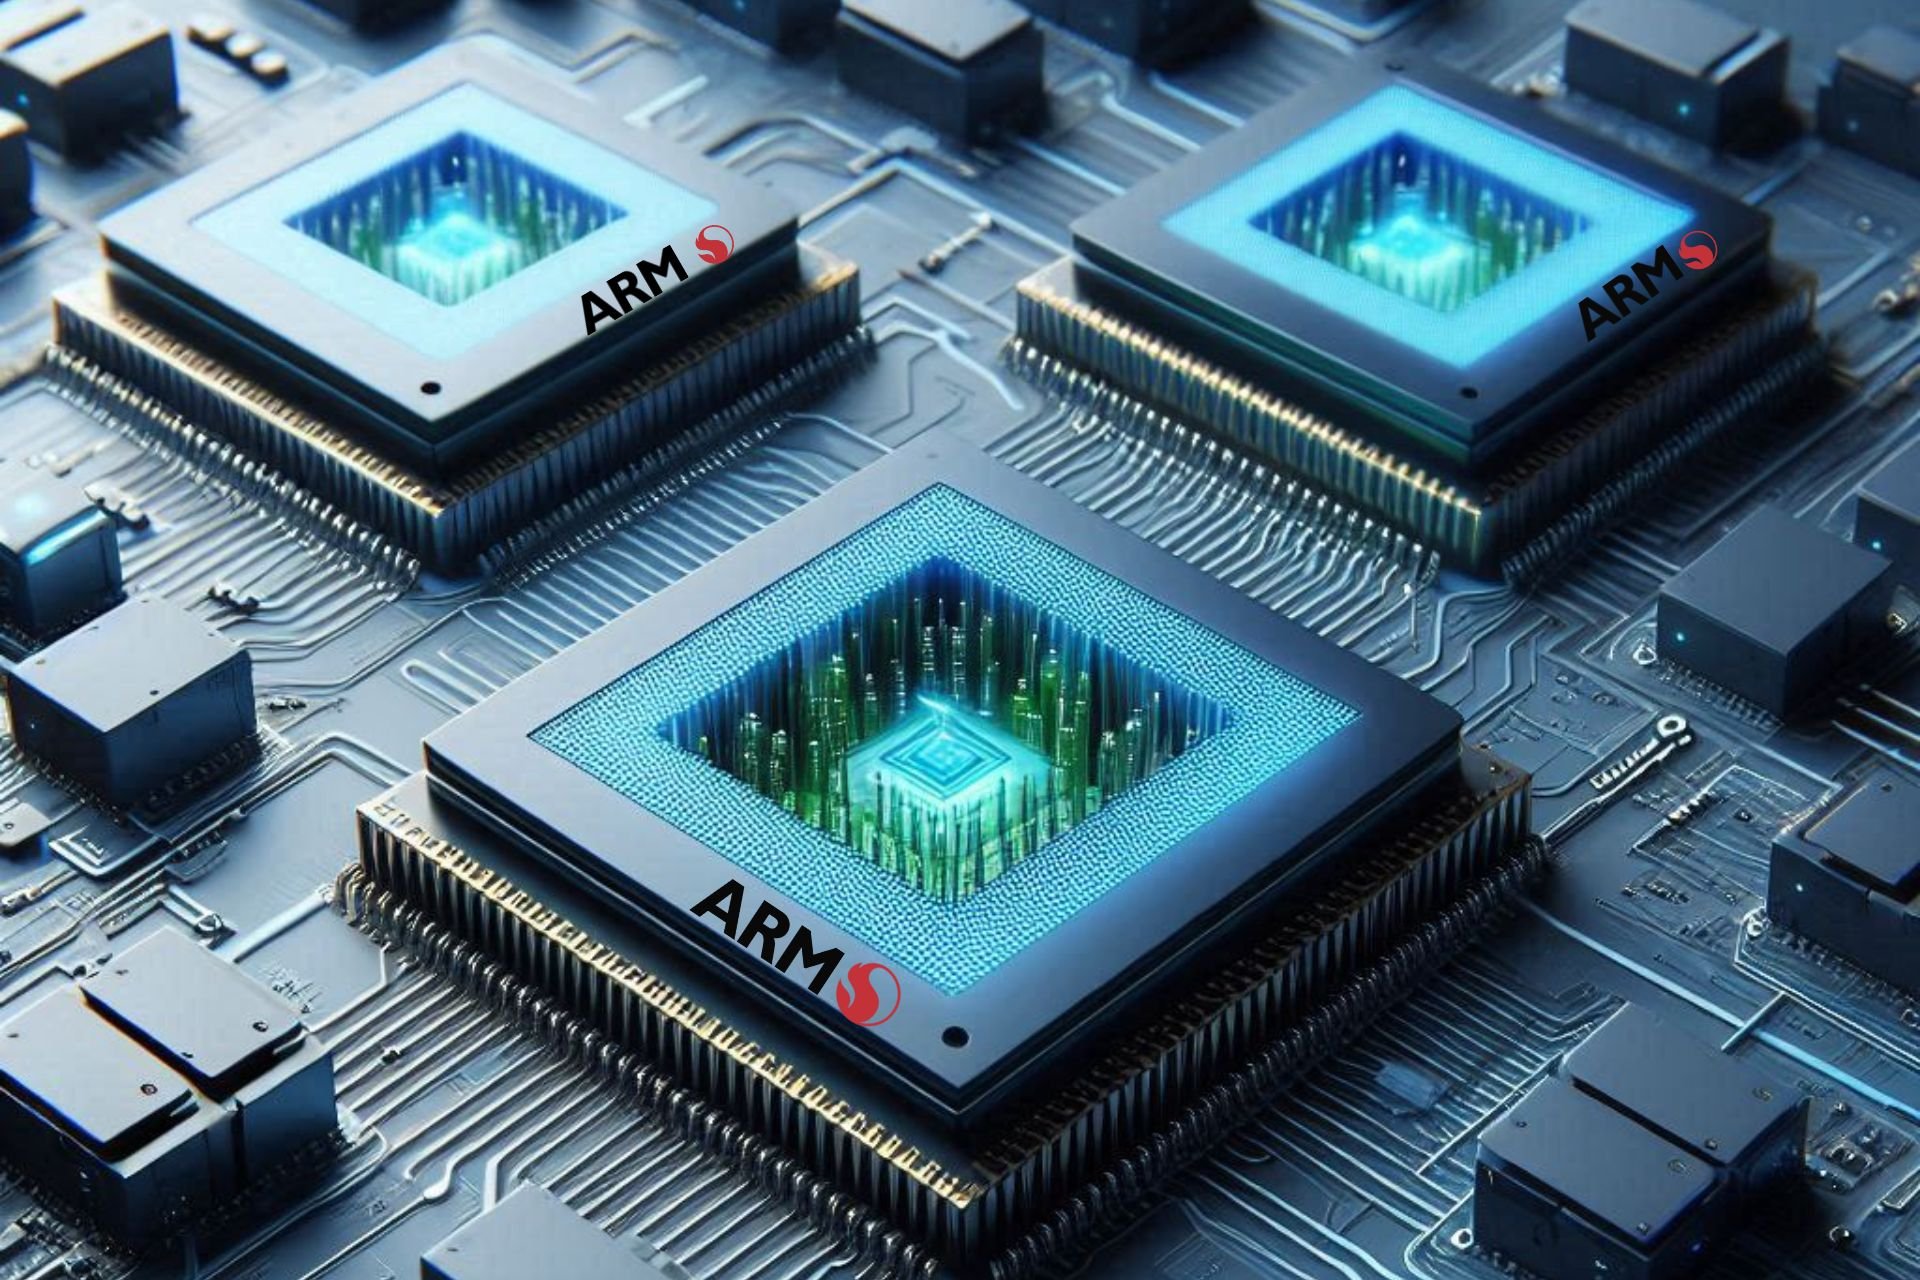 An AI generated image of ARM-based processors featuring the logo of the company